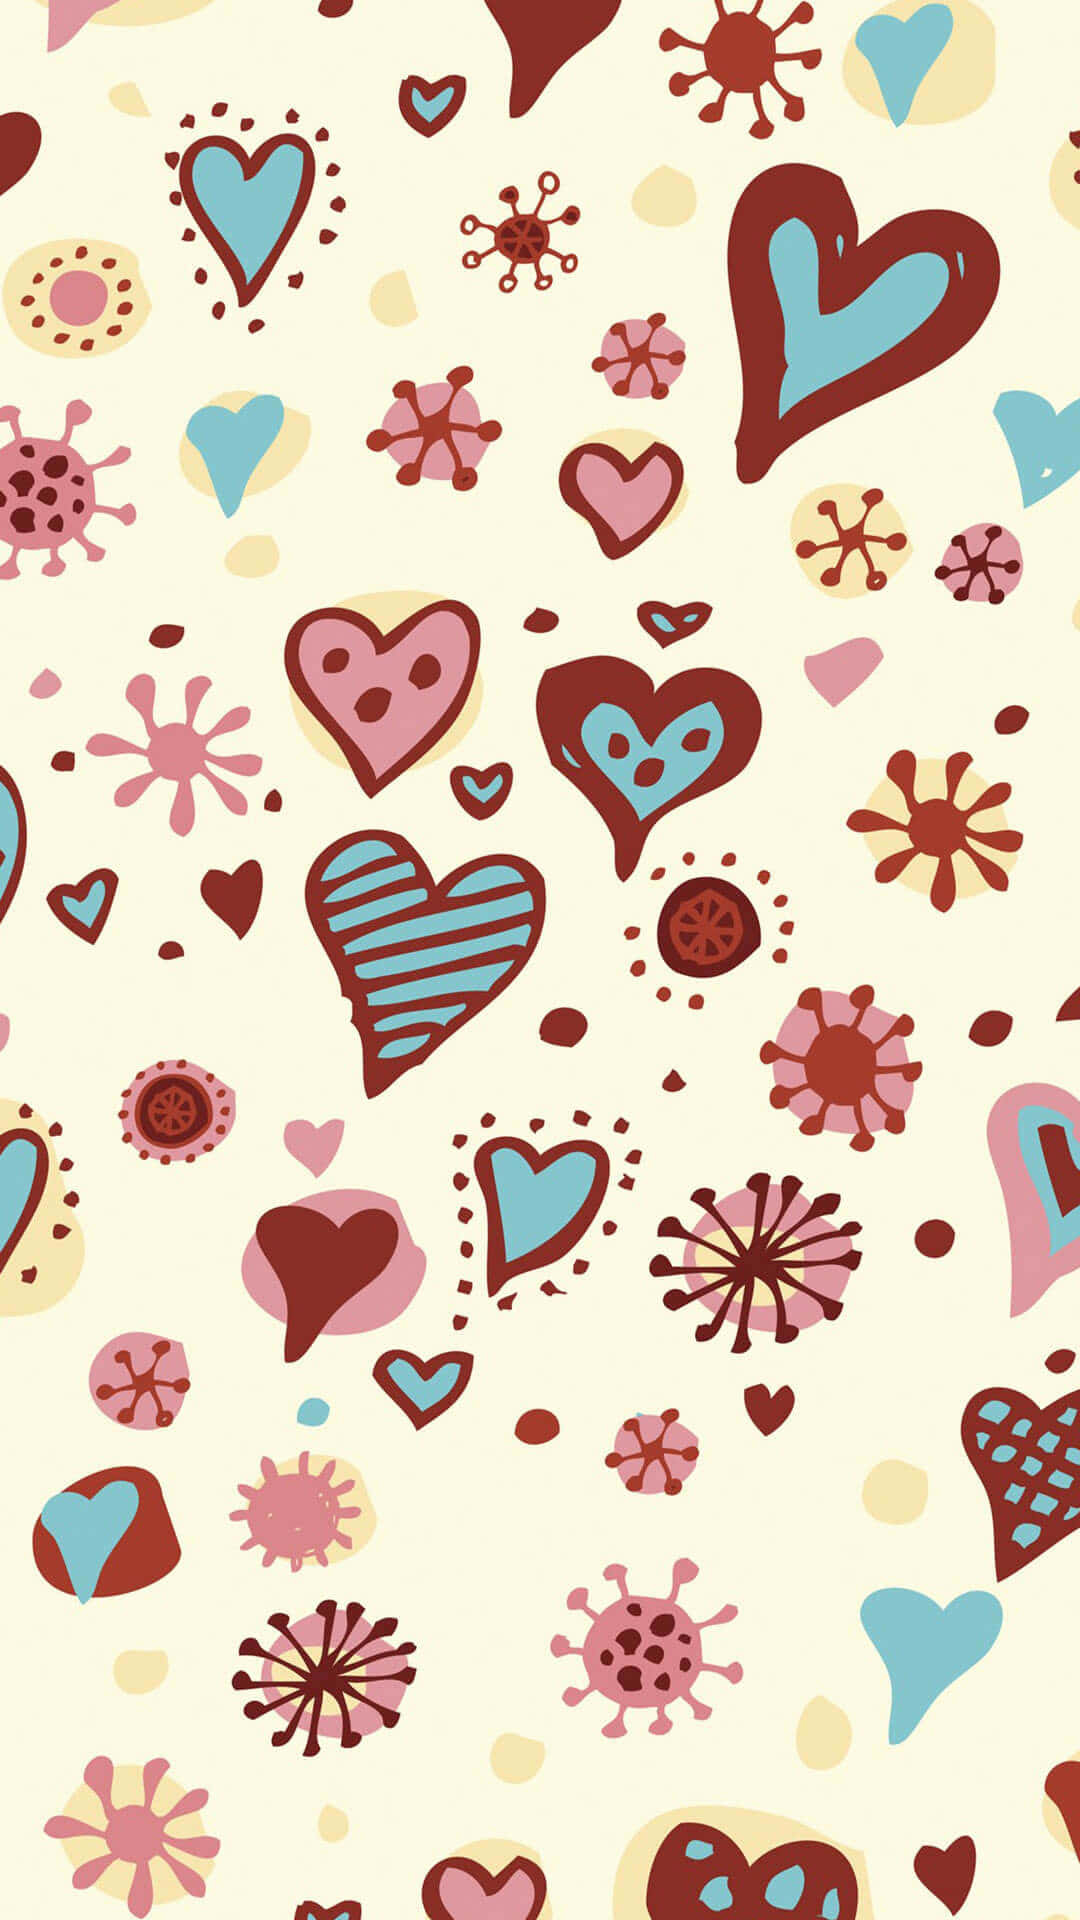 A Pattern With Hearts And Other Shapes